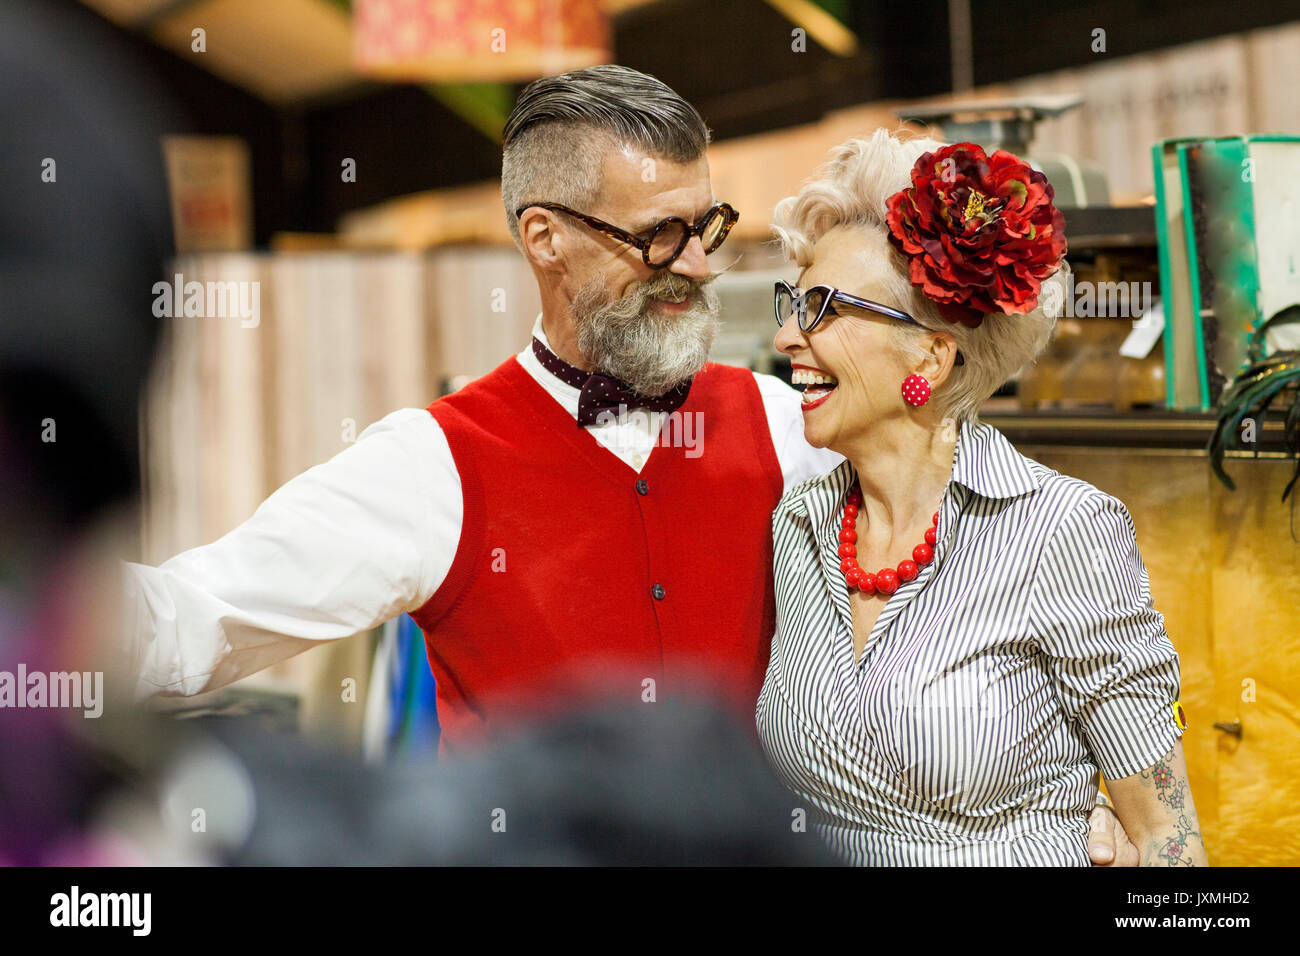 Quirky vintage couple laughing and in antique emporium Banque D'Images